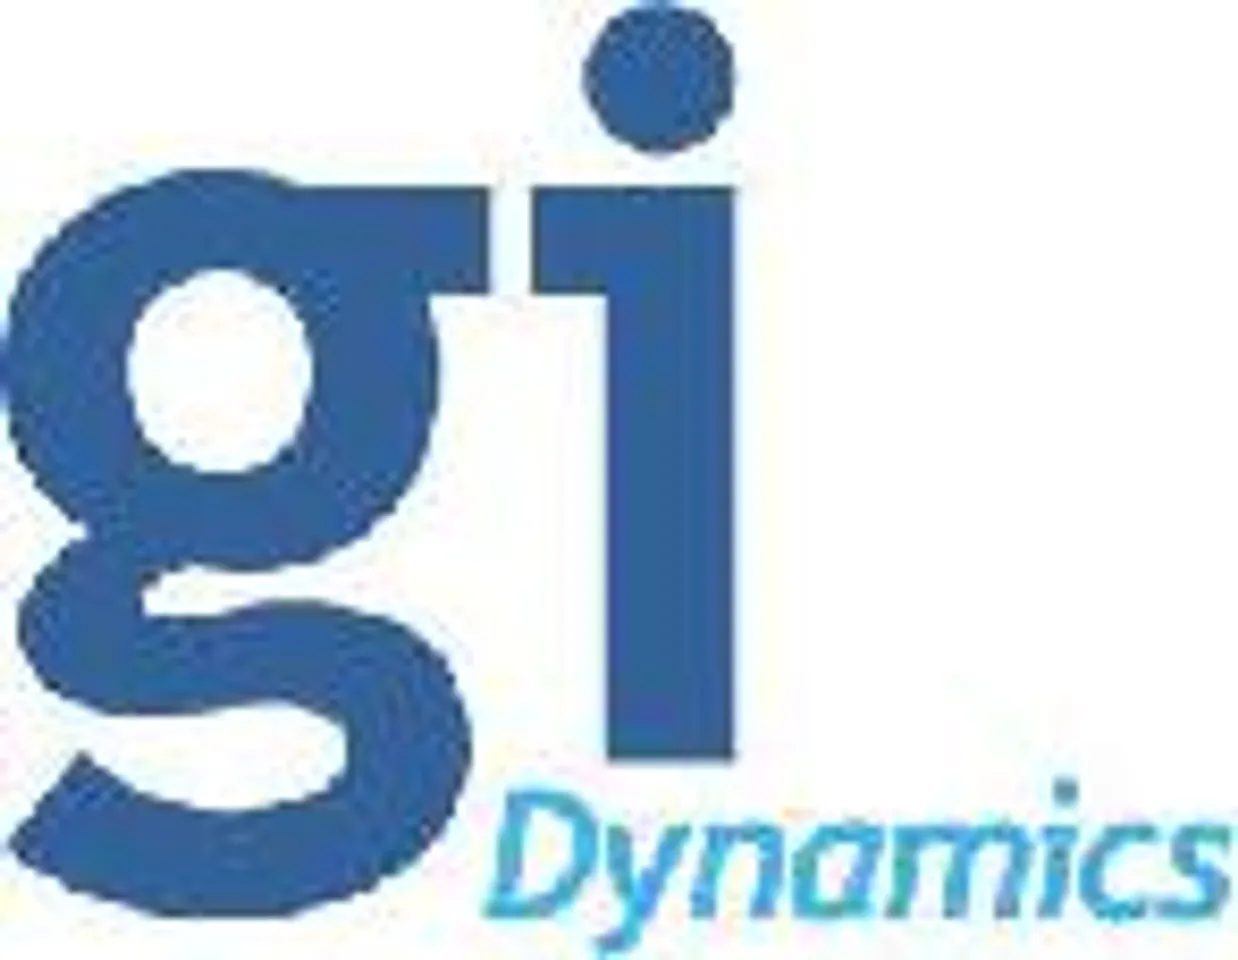 GI Dynamics Announces First Patient Enrolled in the I-STEP Clinical Study of EndoBarrier in India